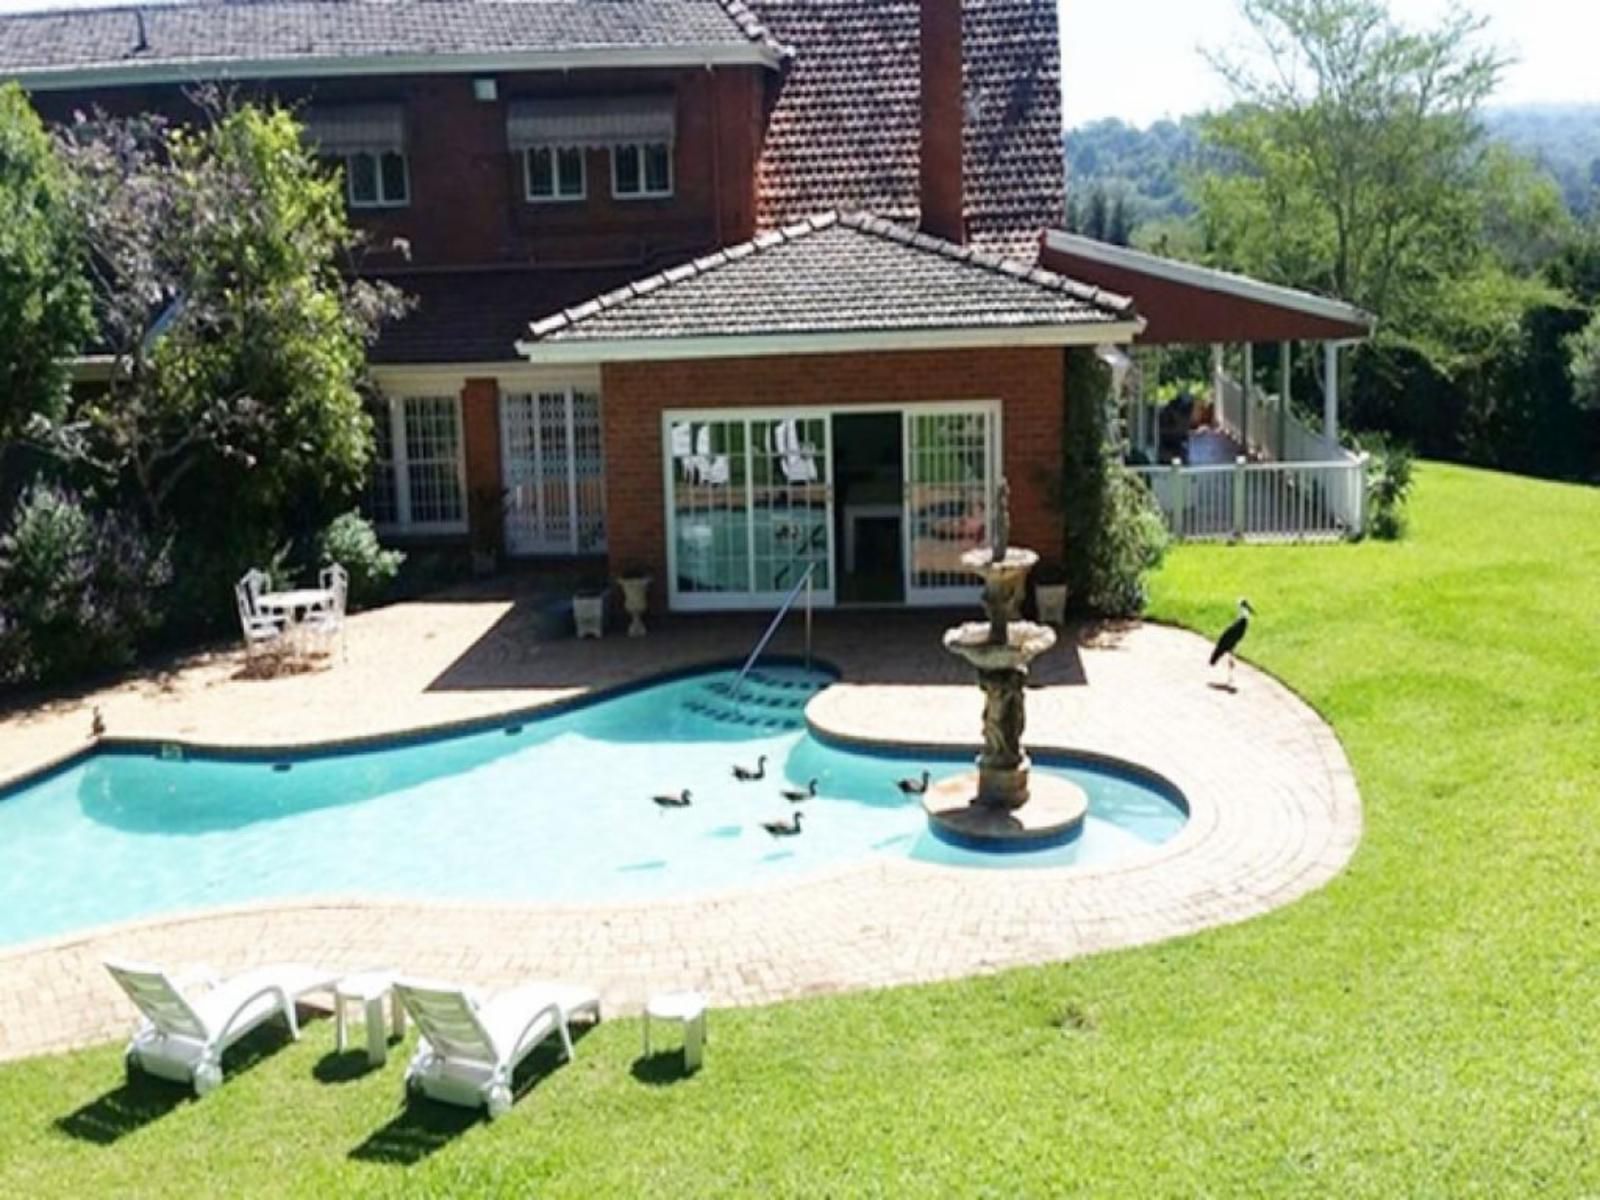 18 Pioneer Bnb Kloof Durban Kwazulu Natal South Africa House, Building, Architecture, Garden, Nature, Plant, Swimming Pool